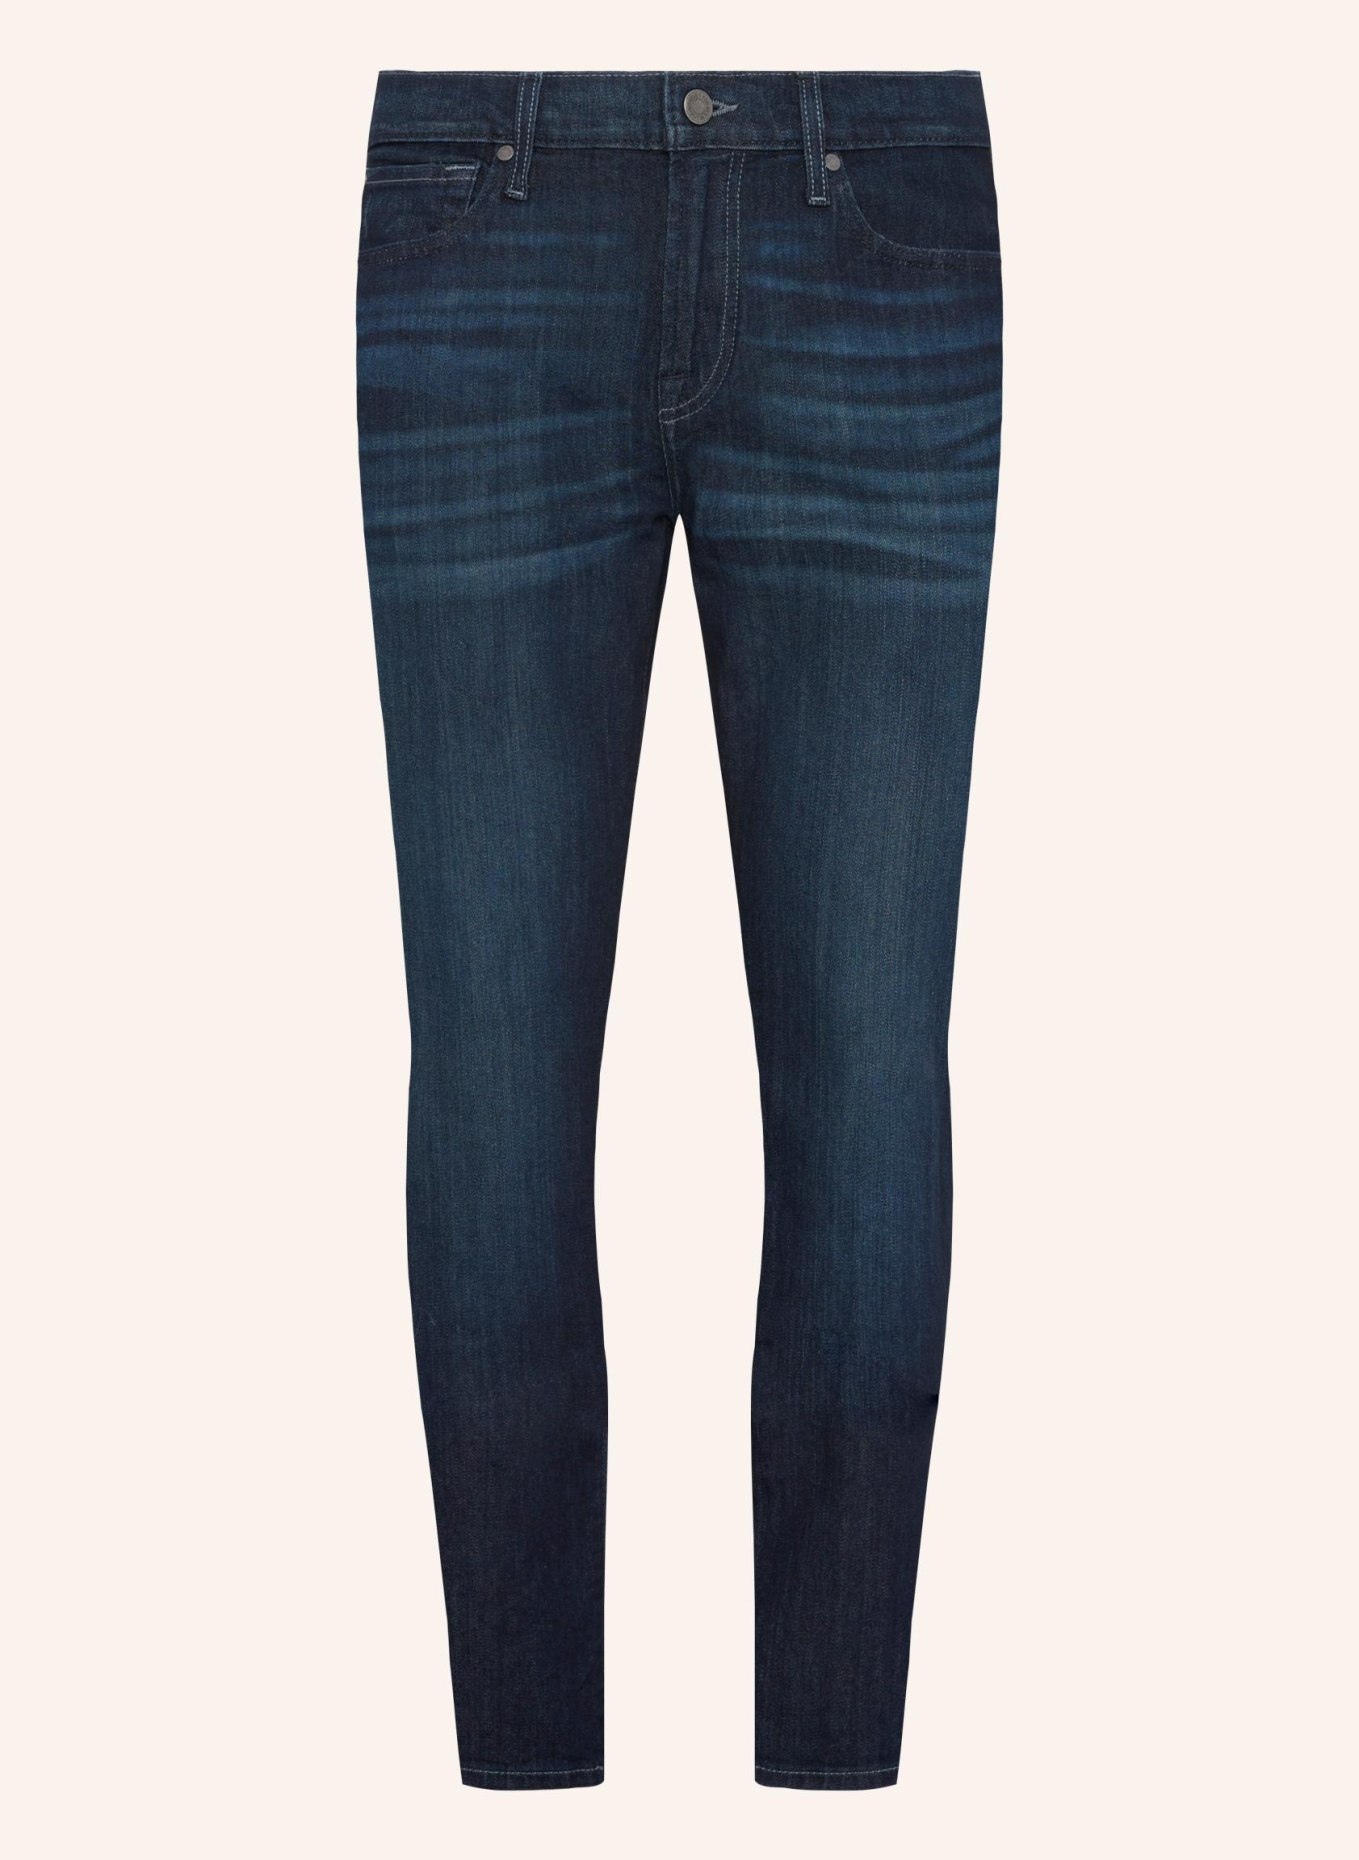 7 for all mankind Jeans Slim Fit  (Bild 1)